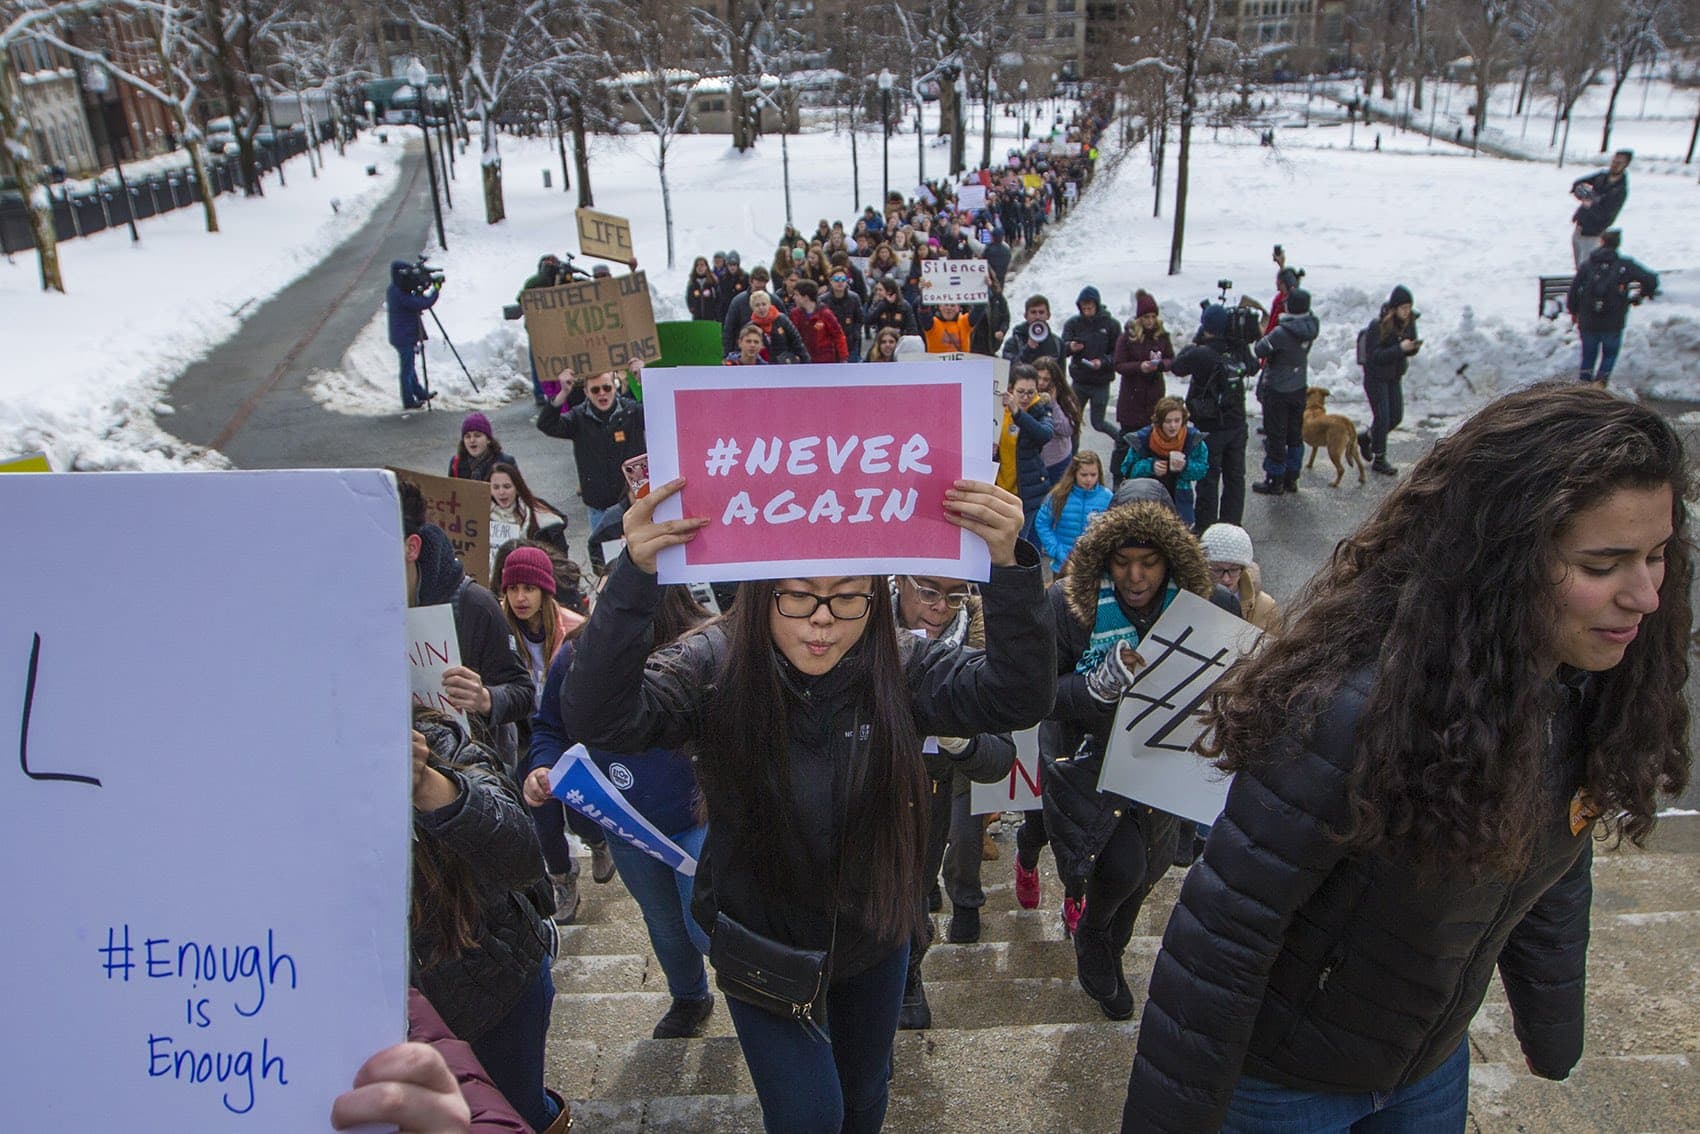 Student calling for stricter gun laws march across Boston Common from St. Paul's Catherdral to the State House one month after the Parkland shooting. (Jesse Costa/WBUR)